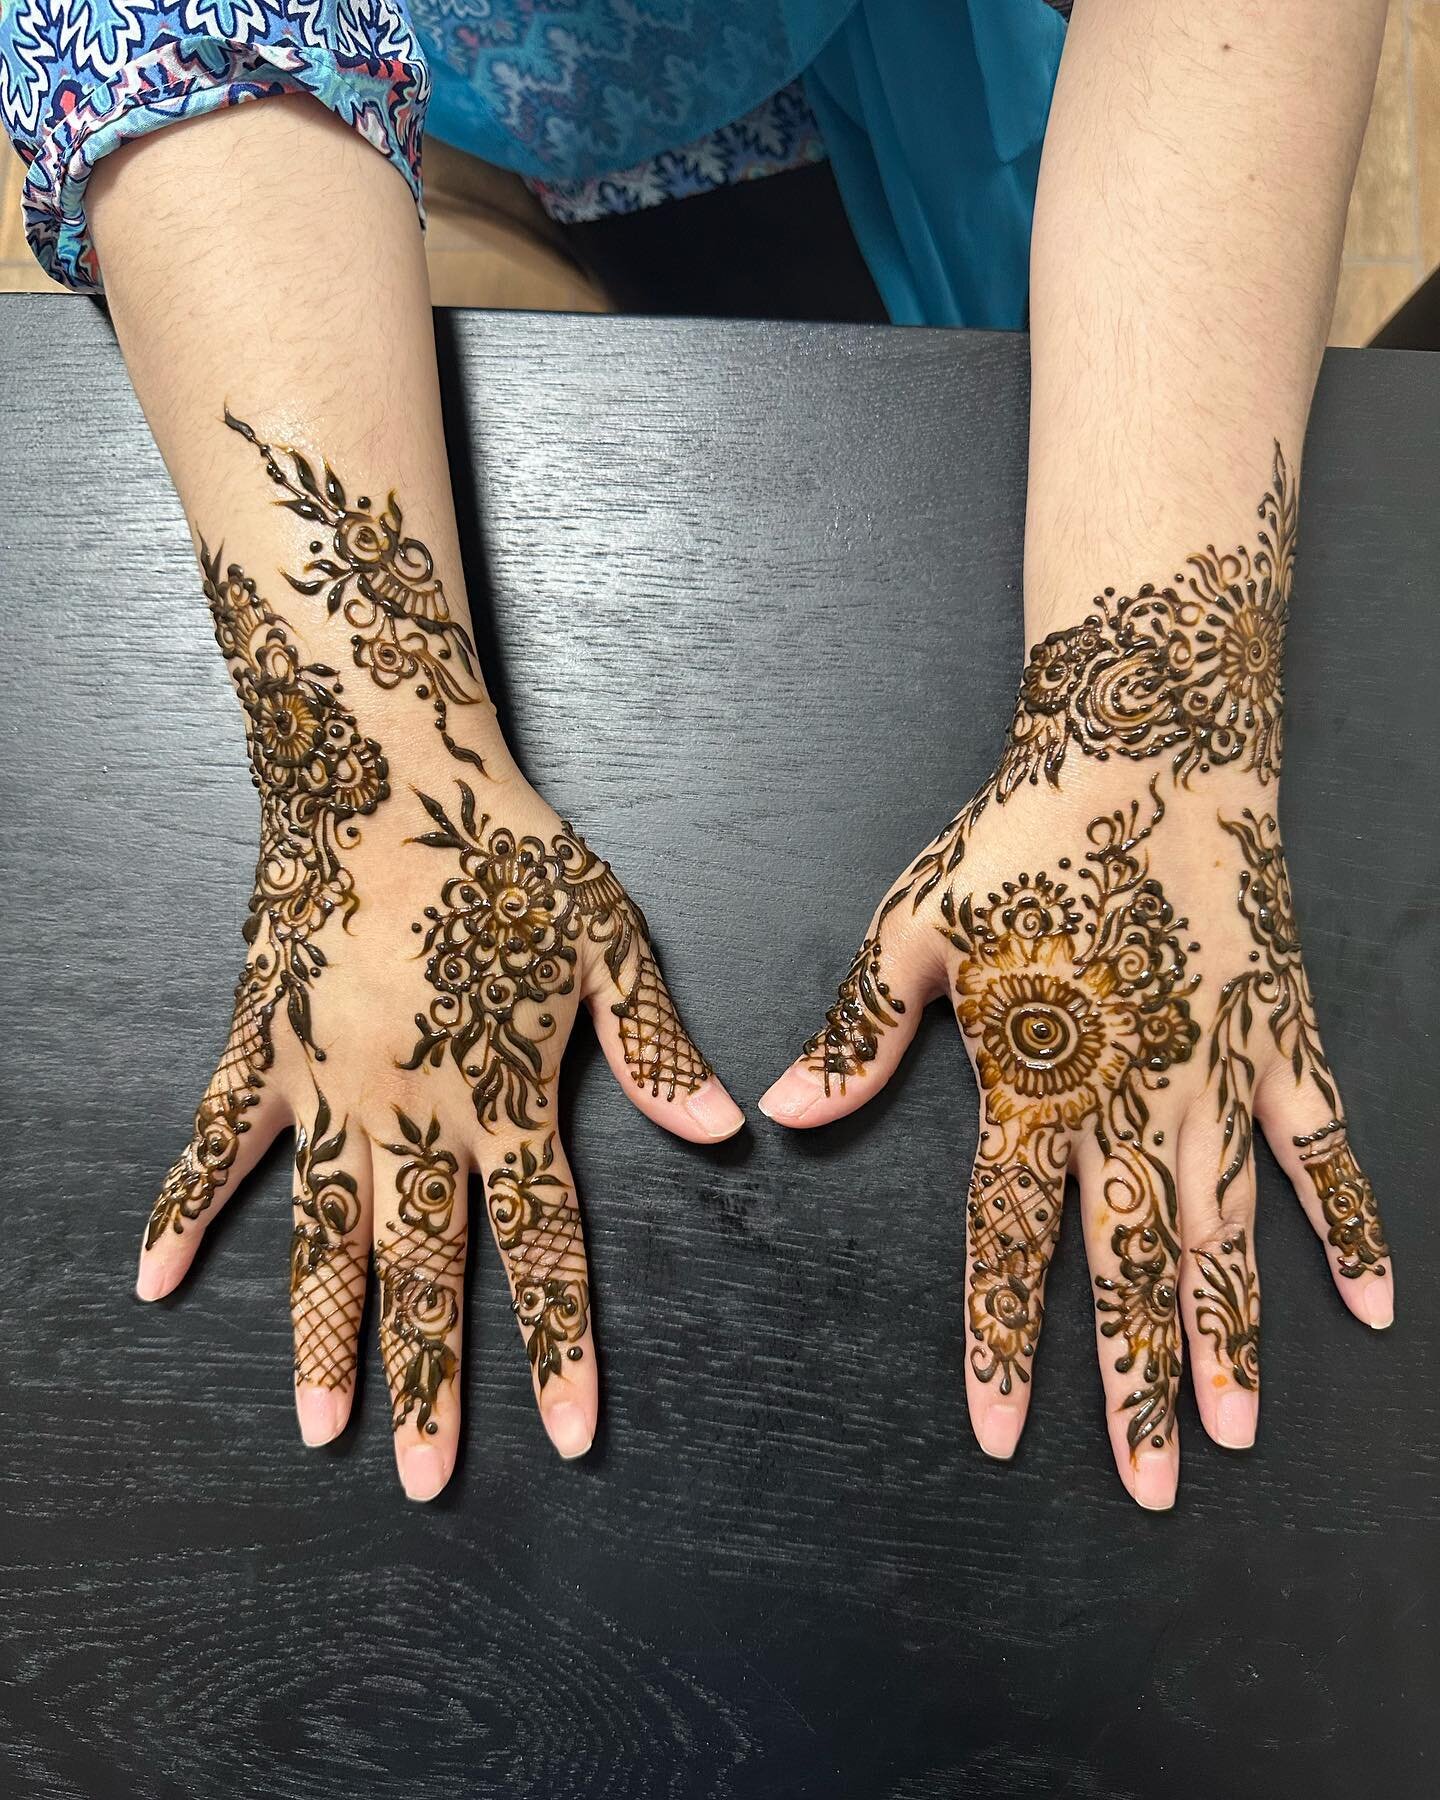 Eid Mubarak to all! When I decided to become a henna artist, I didn&rsquo;t realize that instead of spending time with my family, I&rsquo;m going to be doing henna for every Eid. It&rsquo;s hard, but it&rsquo;s a blessing at the same time. I get to b